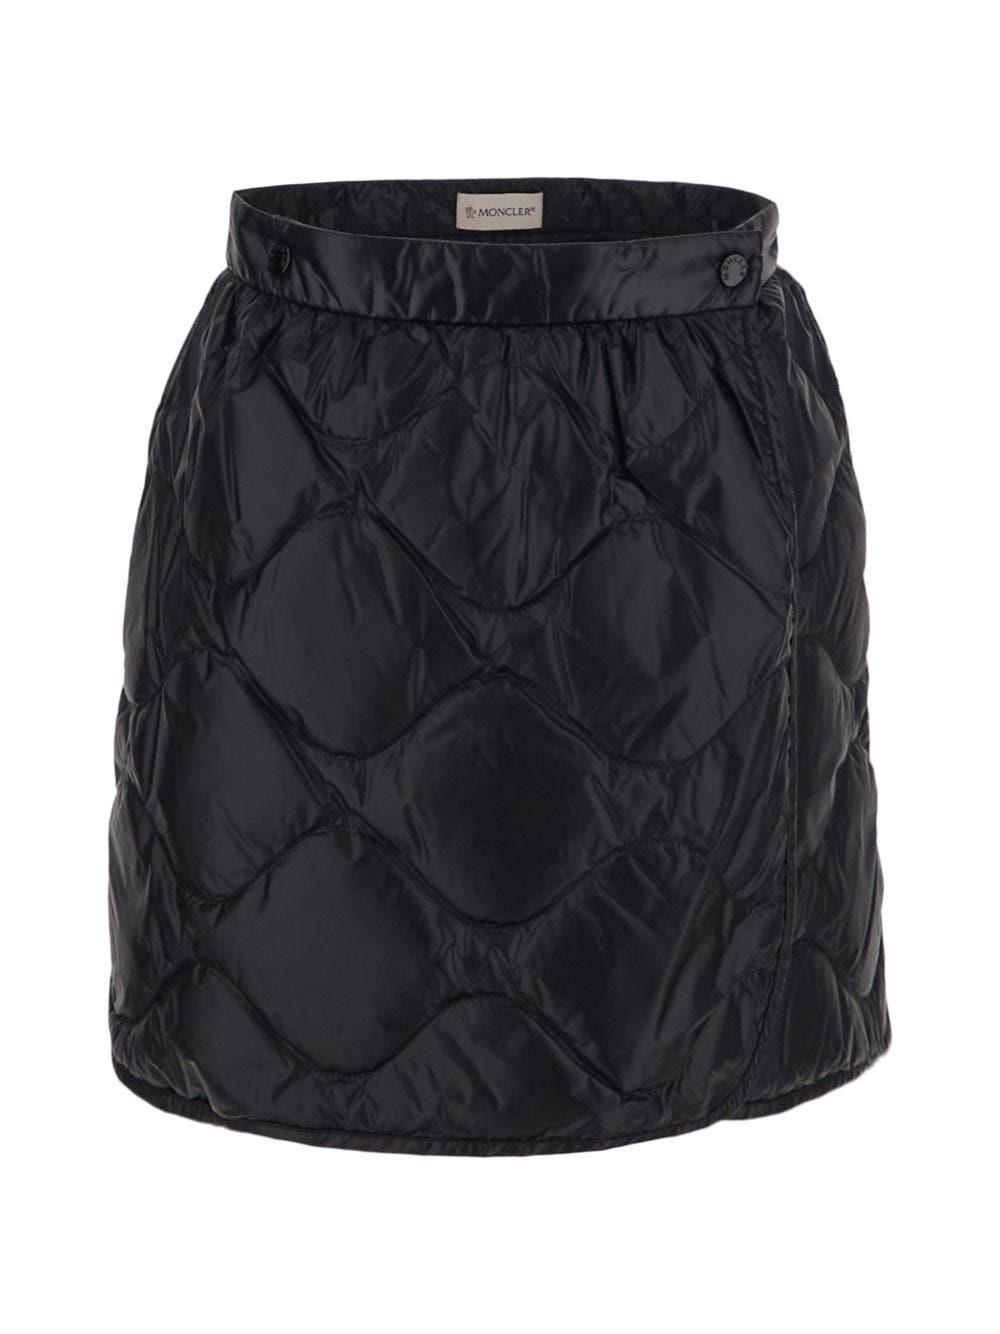 Moncler Quilted Skirt in Black | Lyst UK